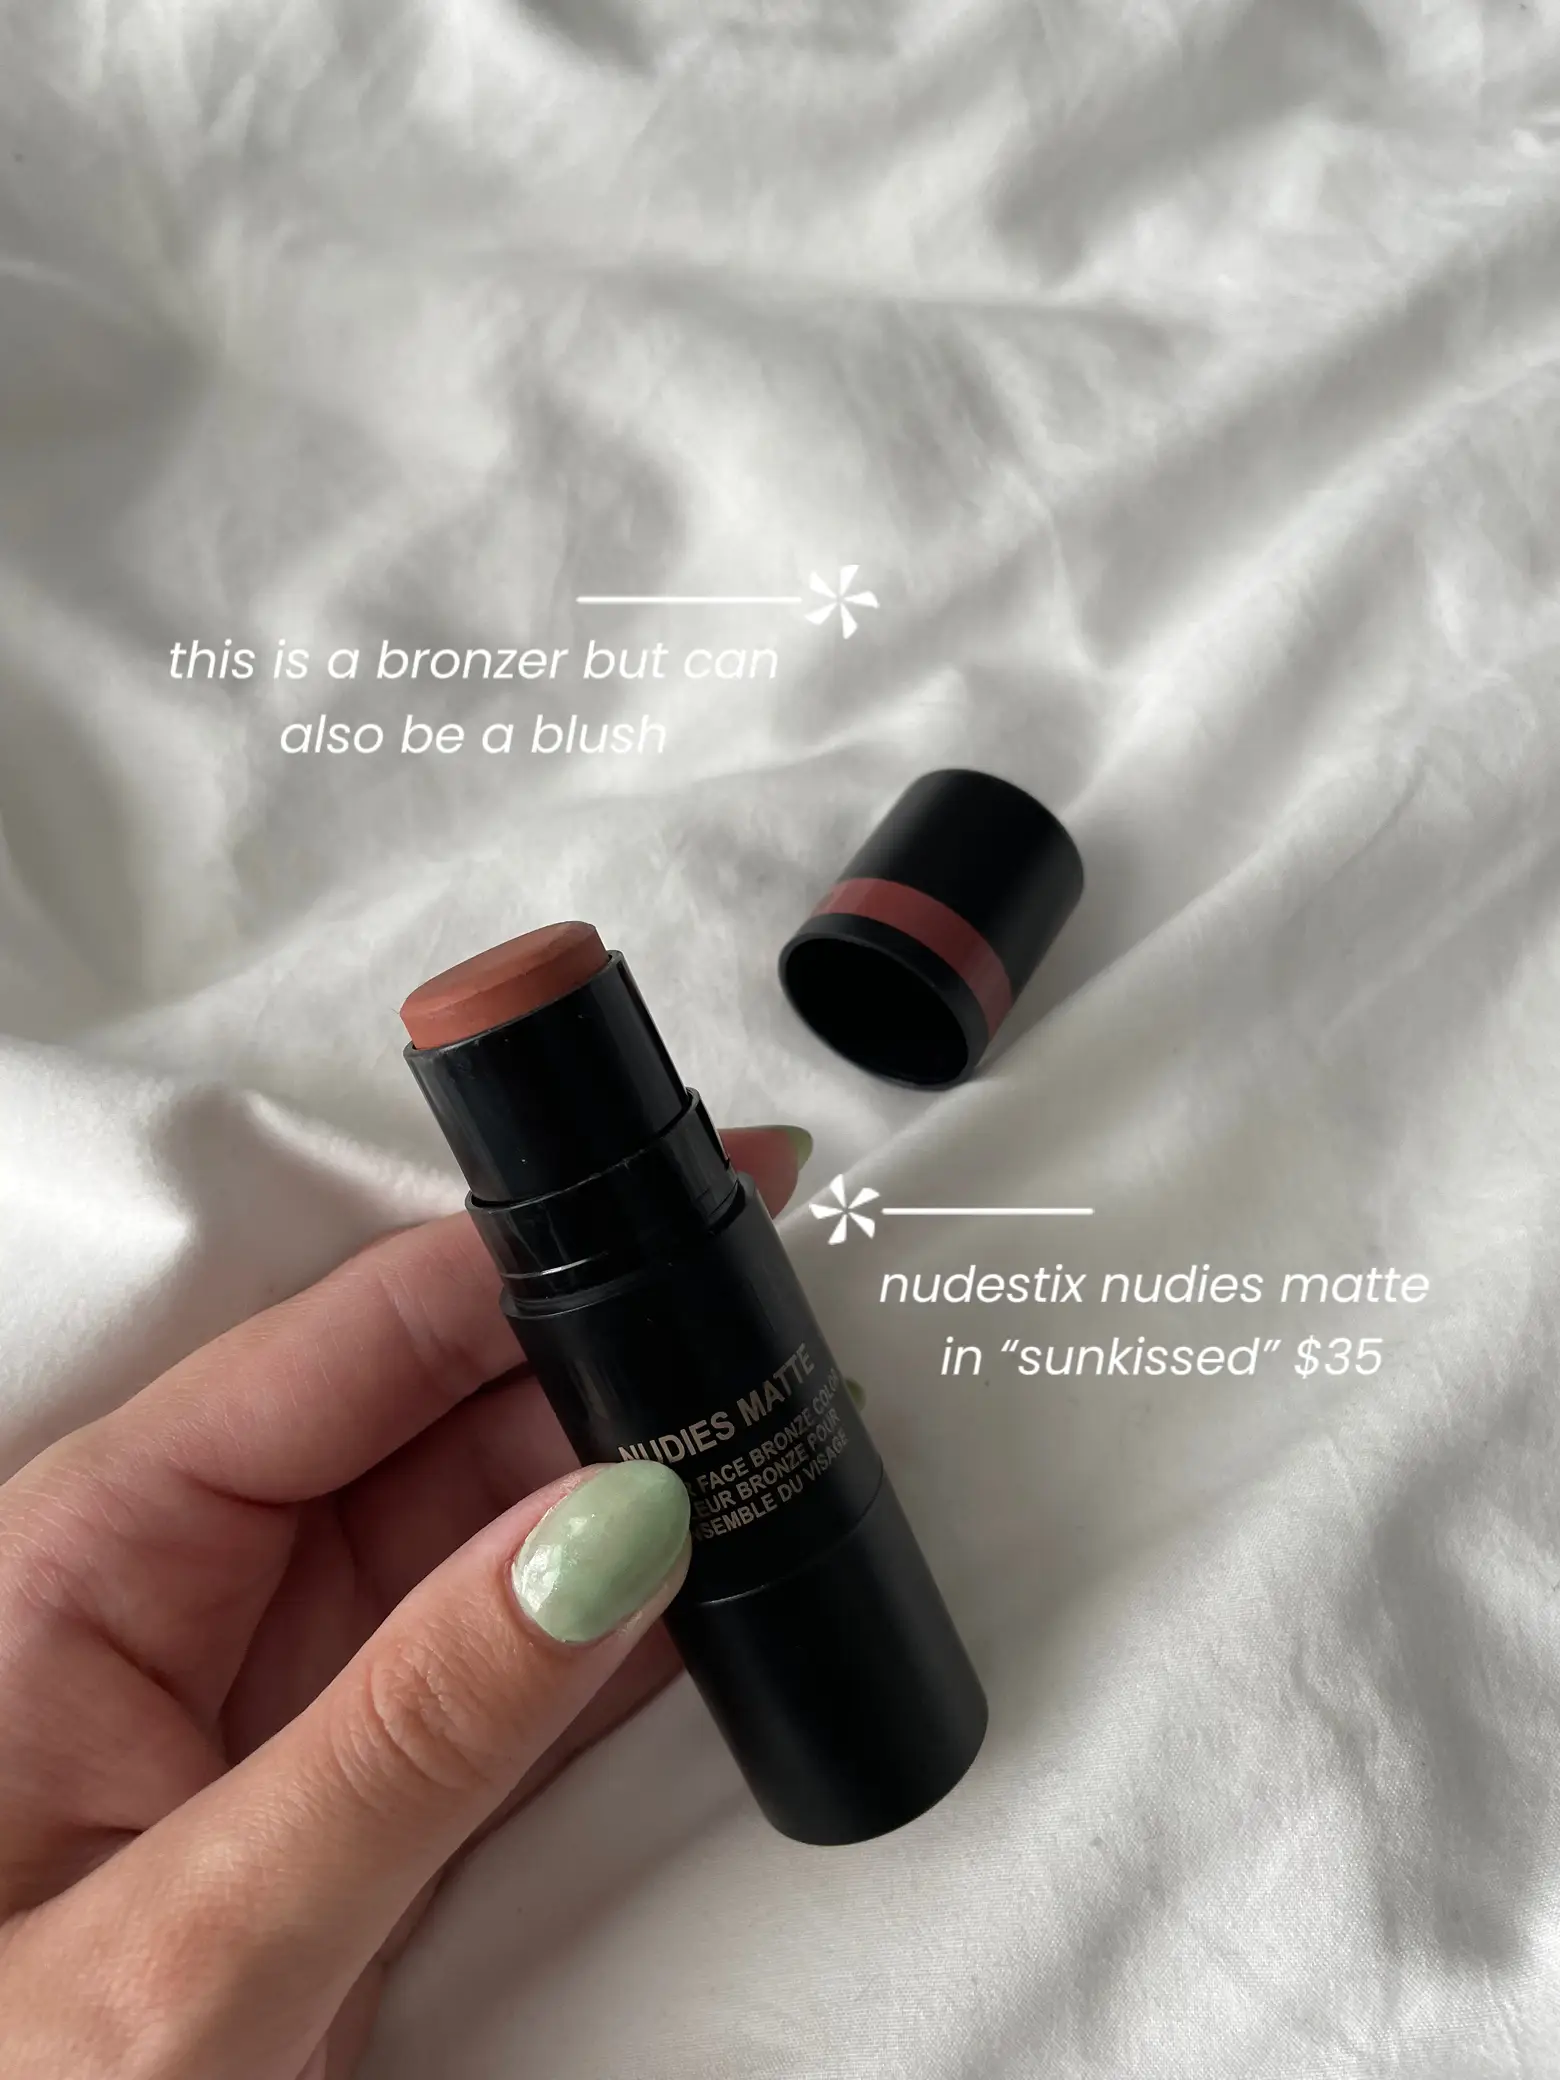 Nudestix Sunkissed Blush Bronzer Review Gallery Posted By Faith Robertson Lemon